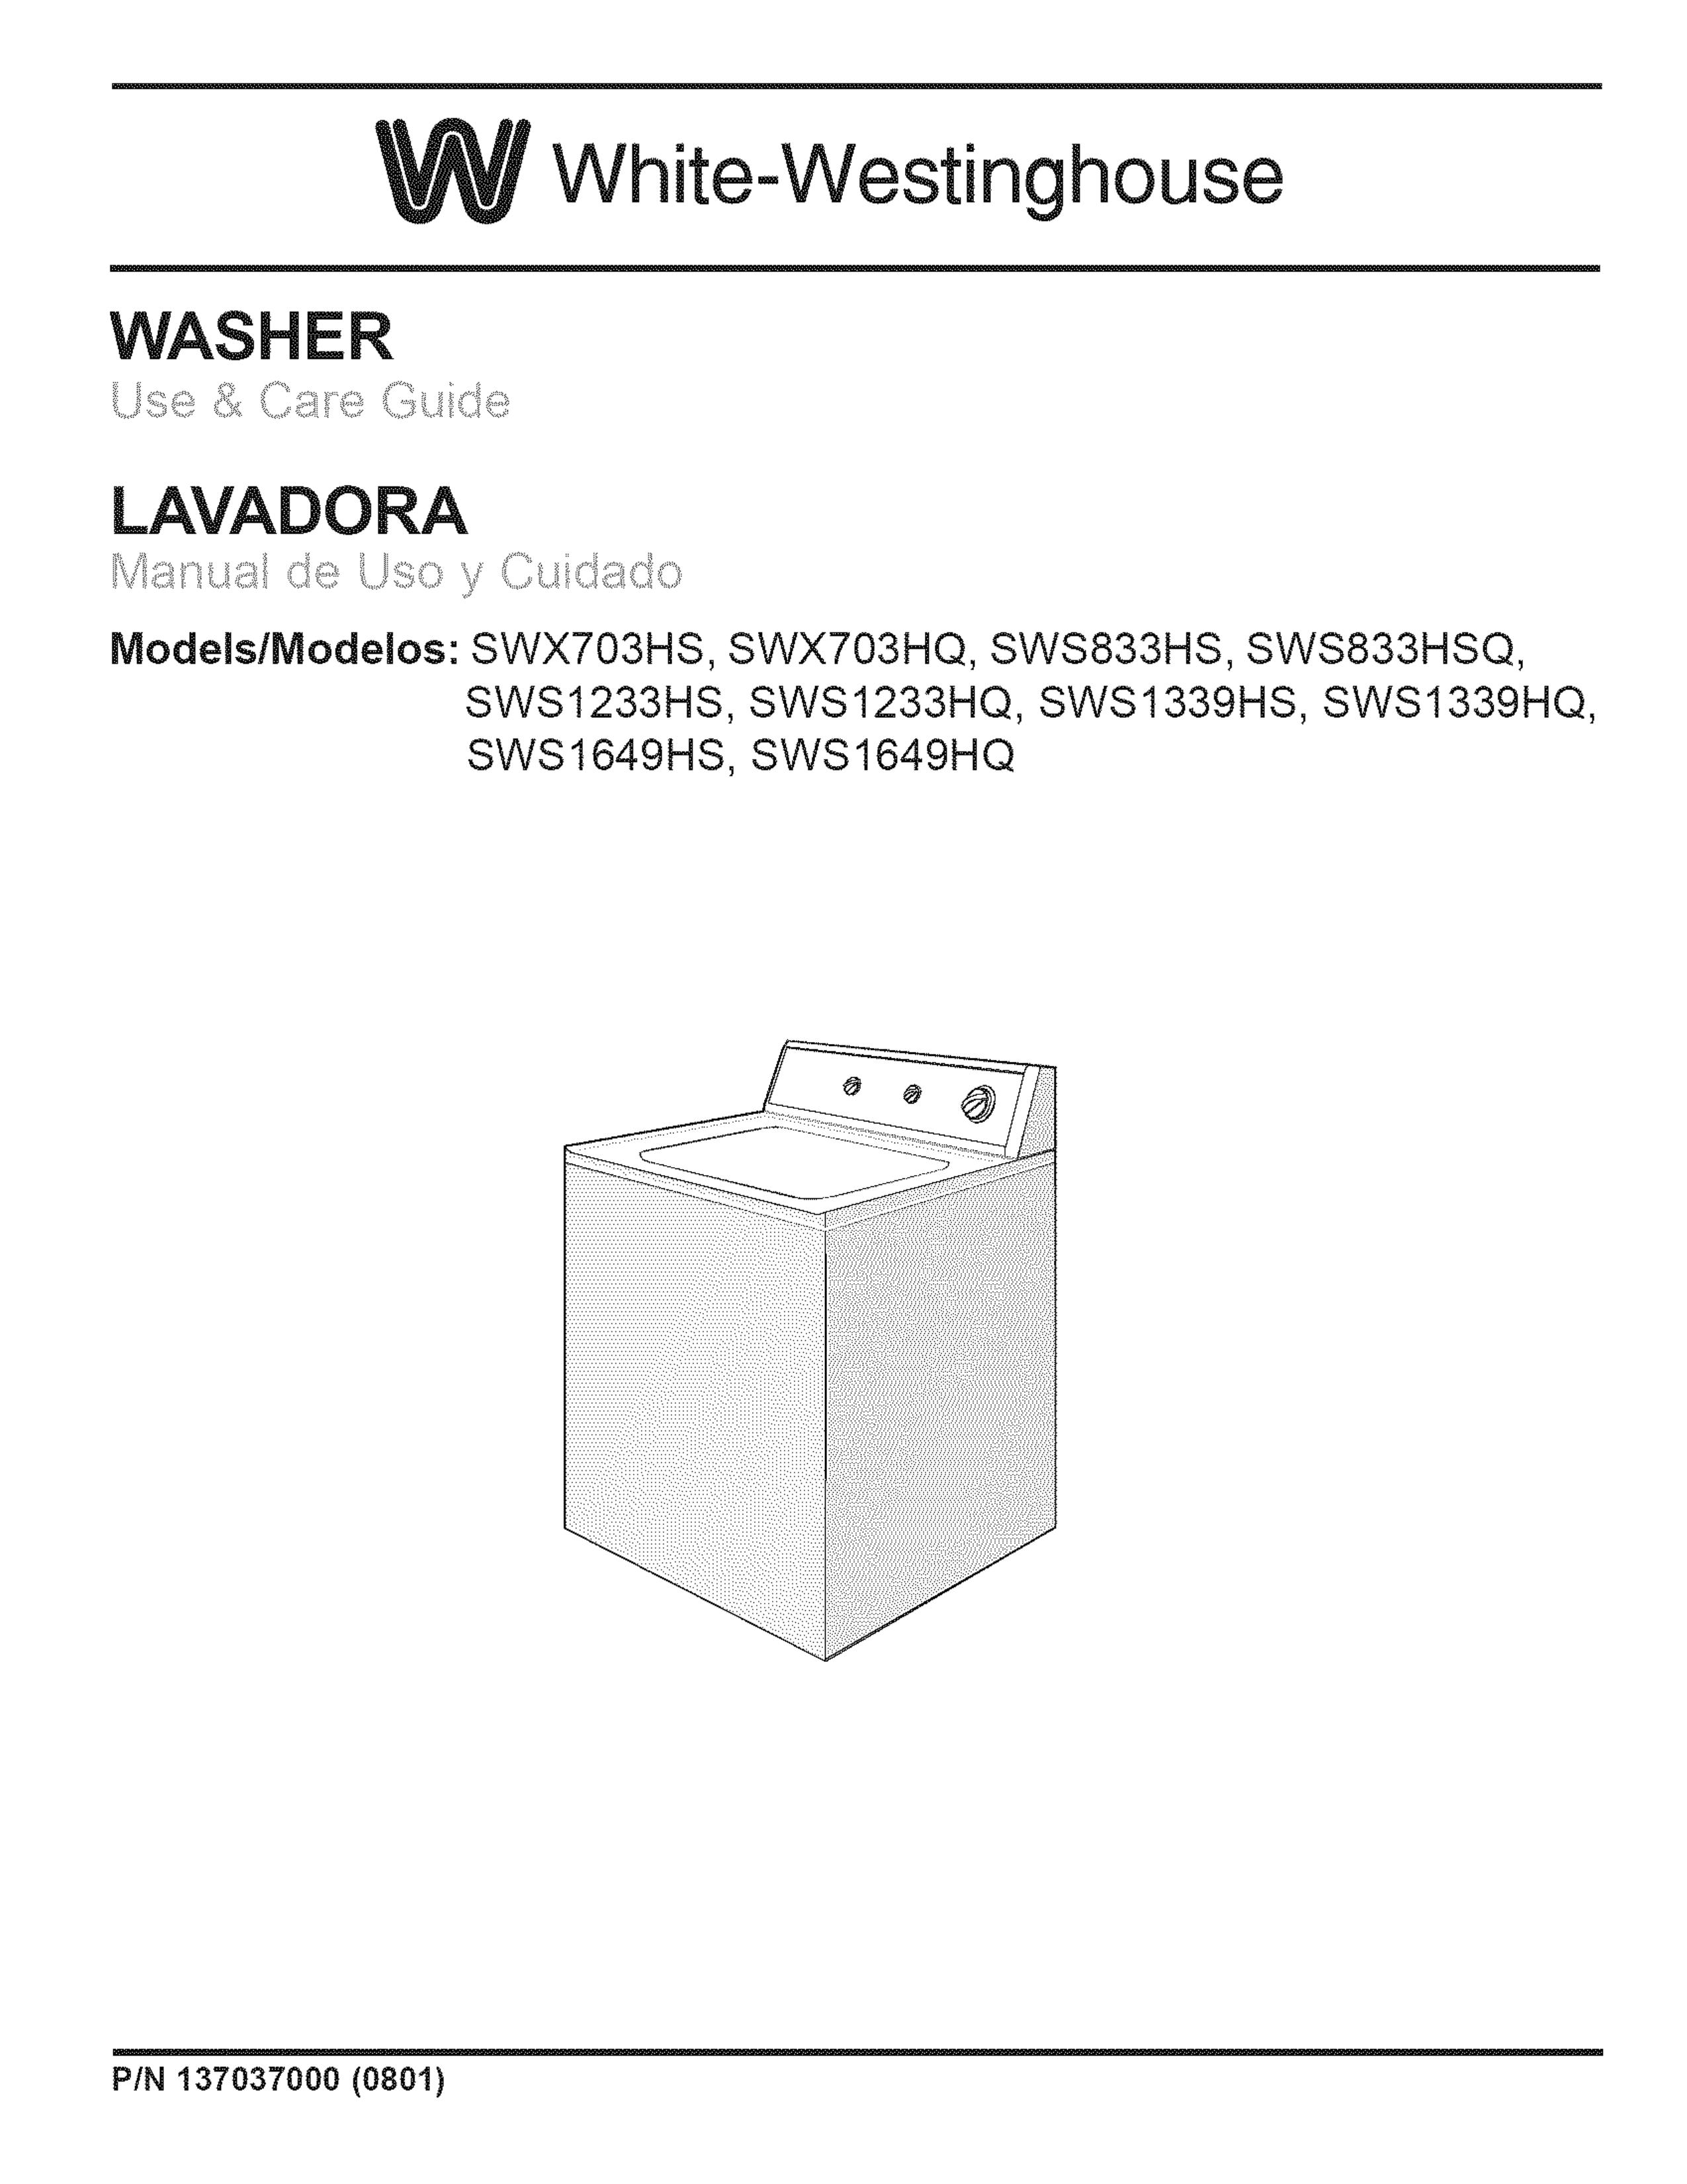 White-Westinghouse SWS1339HS Washer User Manual